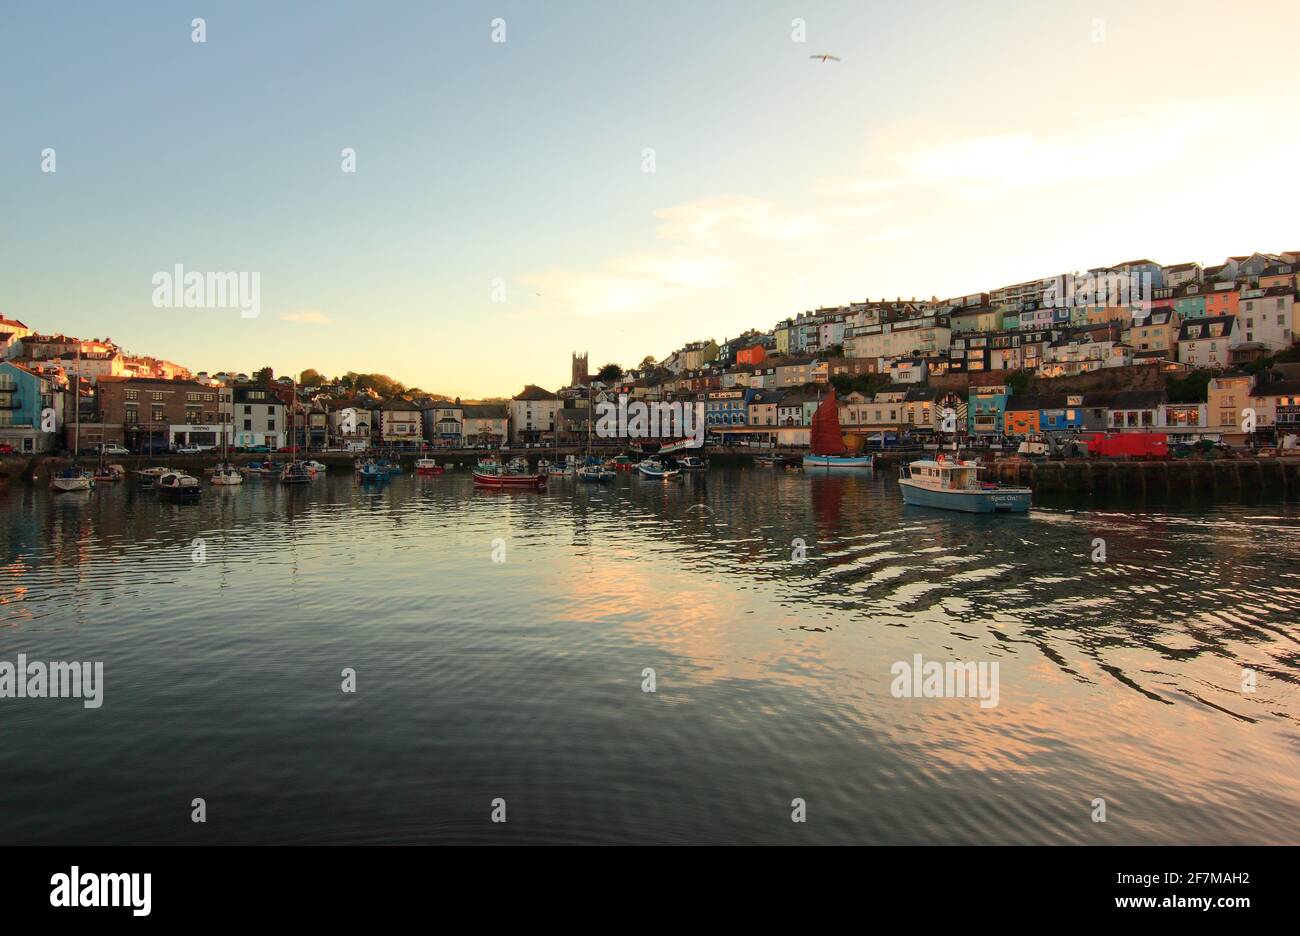 Brixham harbour catching the evening sunshine as seen in the windows of the buildings overlooking the harbour. Stock Photo